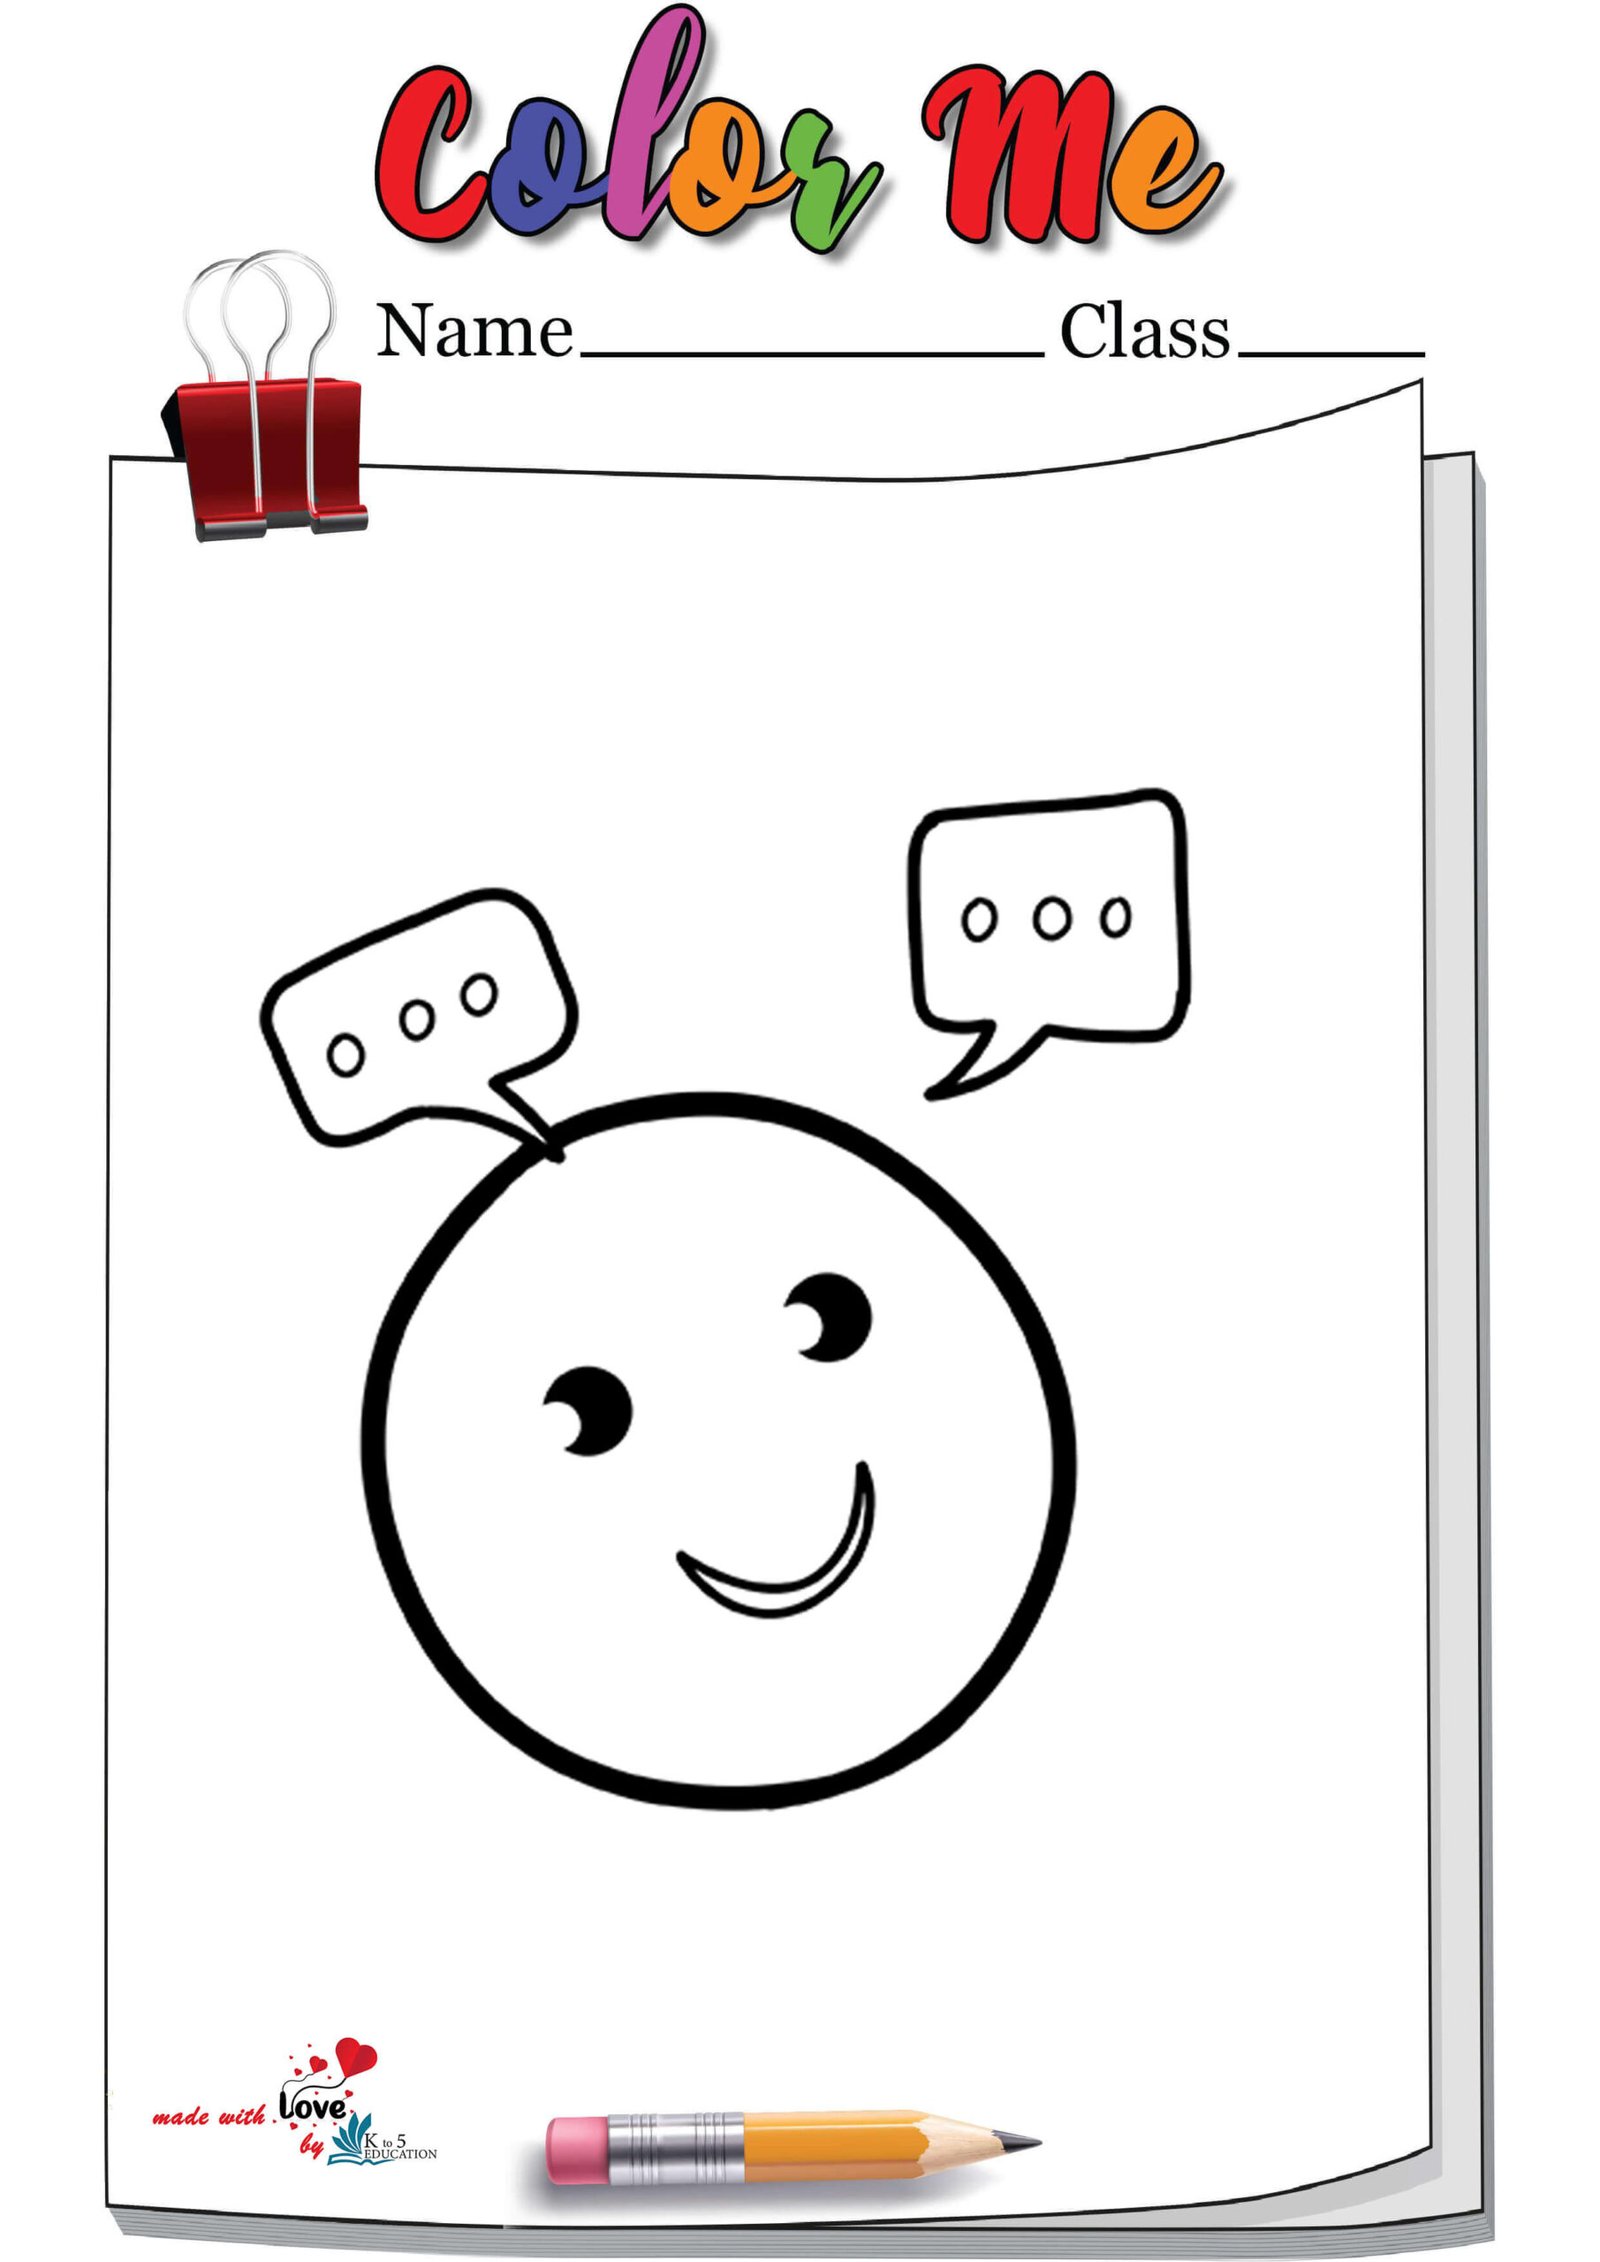 Bubble Speech Chat Icon Coloring Page